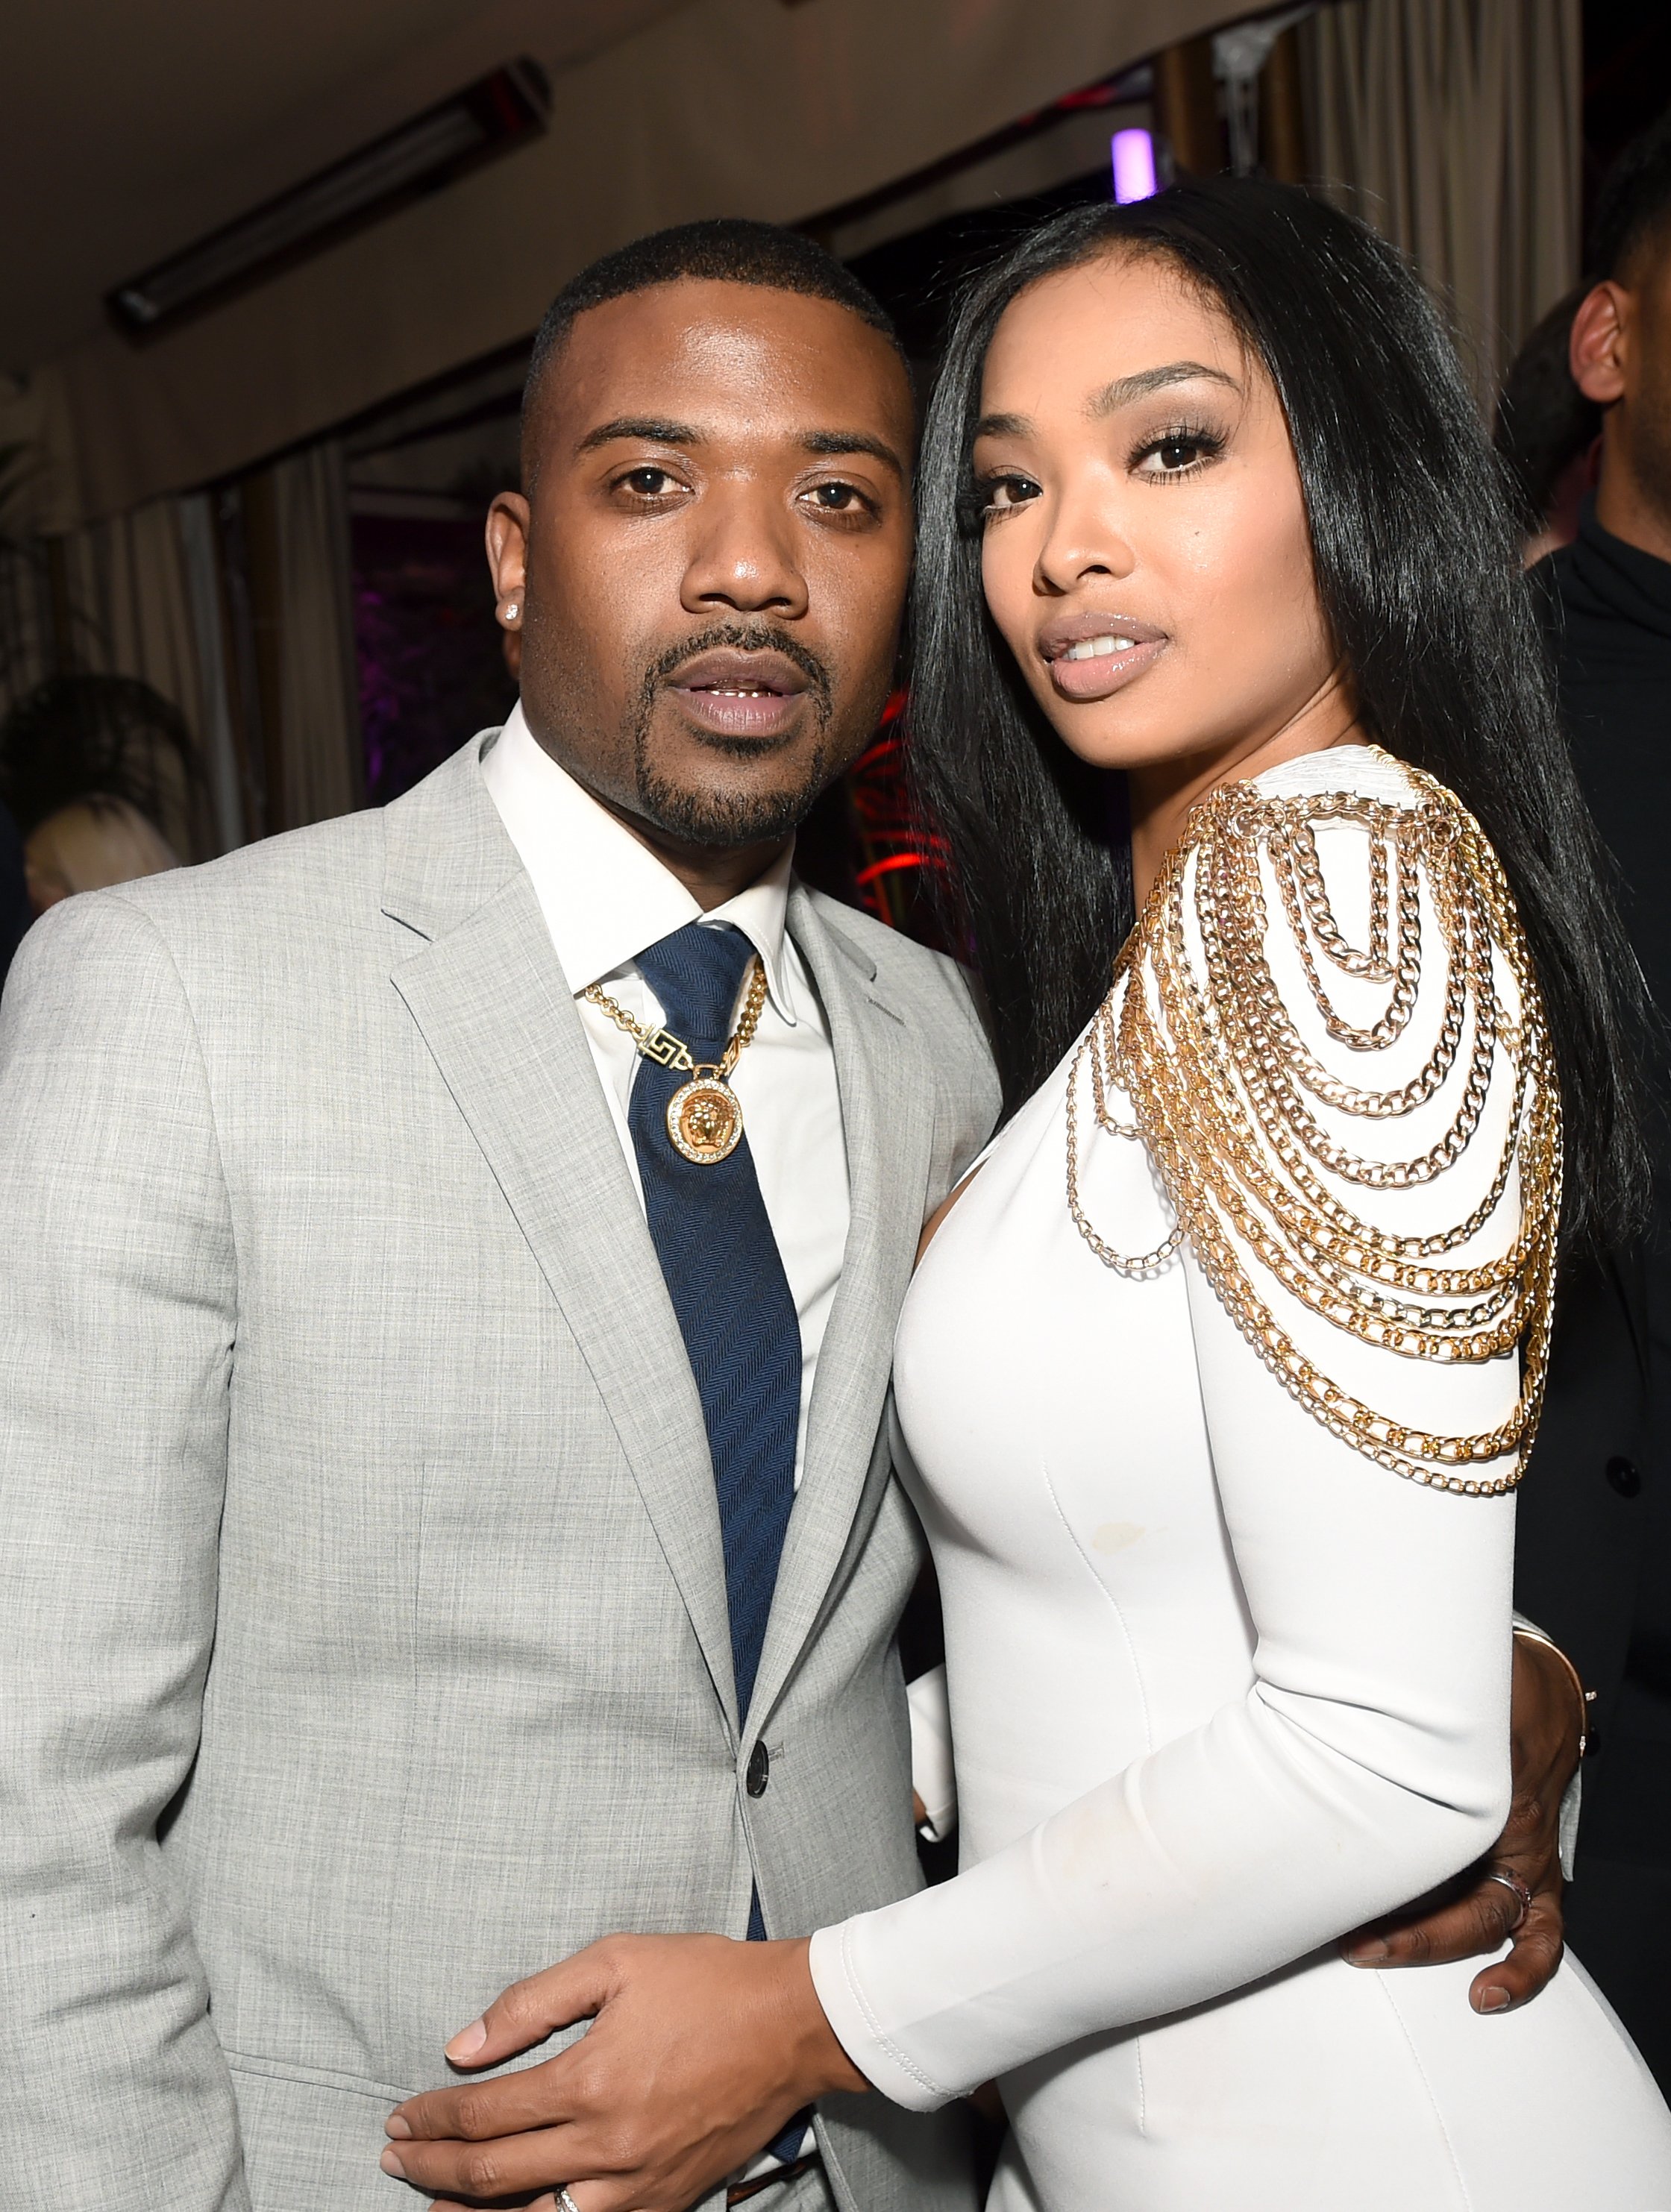 Ray J and Princess Love at a Grammy event in February 2017. | Photo: Getty Images